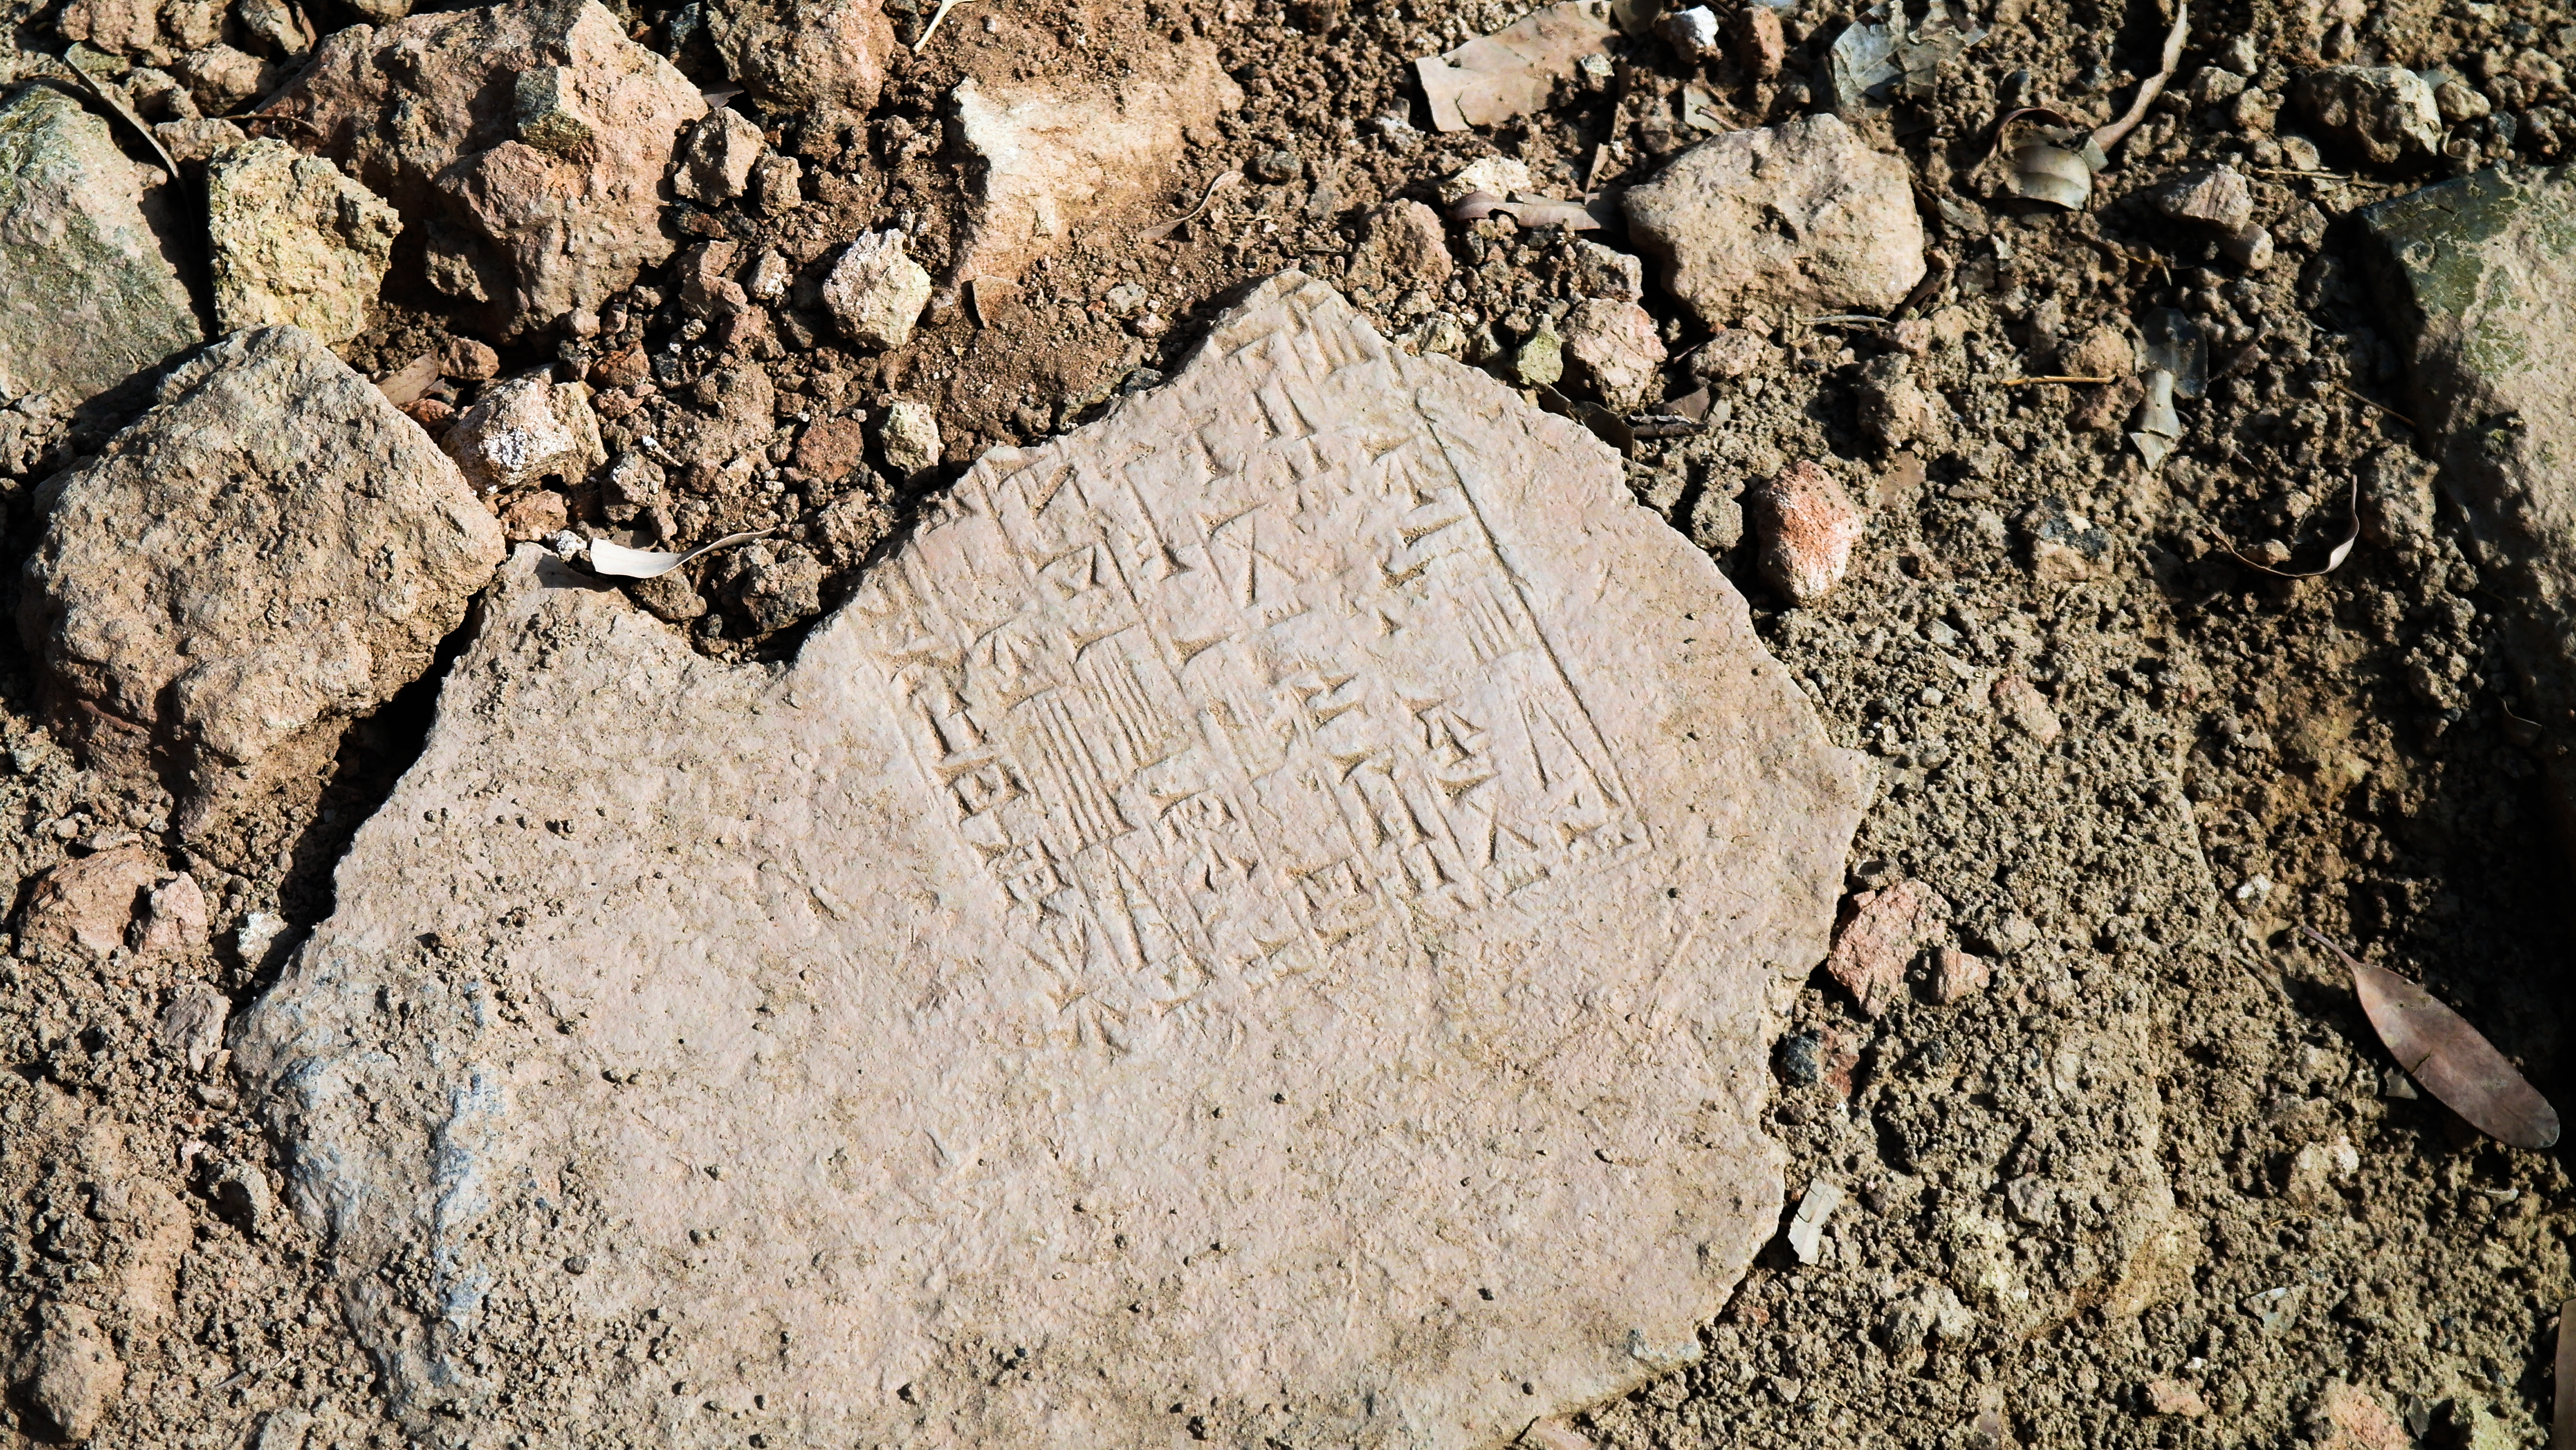 A stone with cuneiform writing laying on the ground.